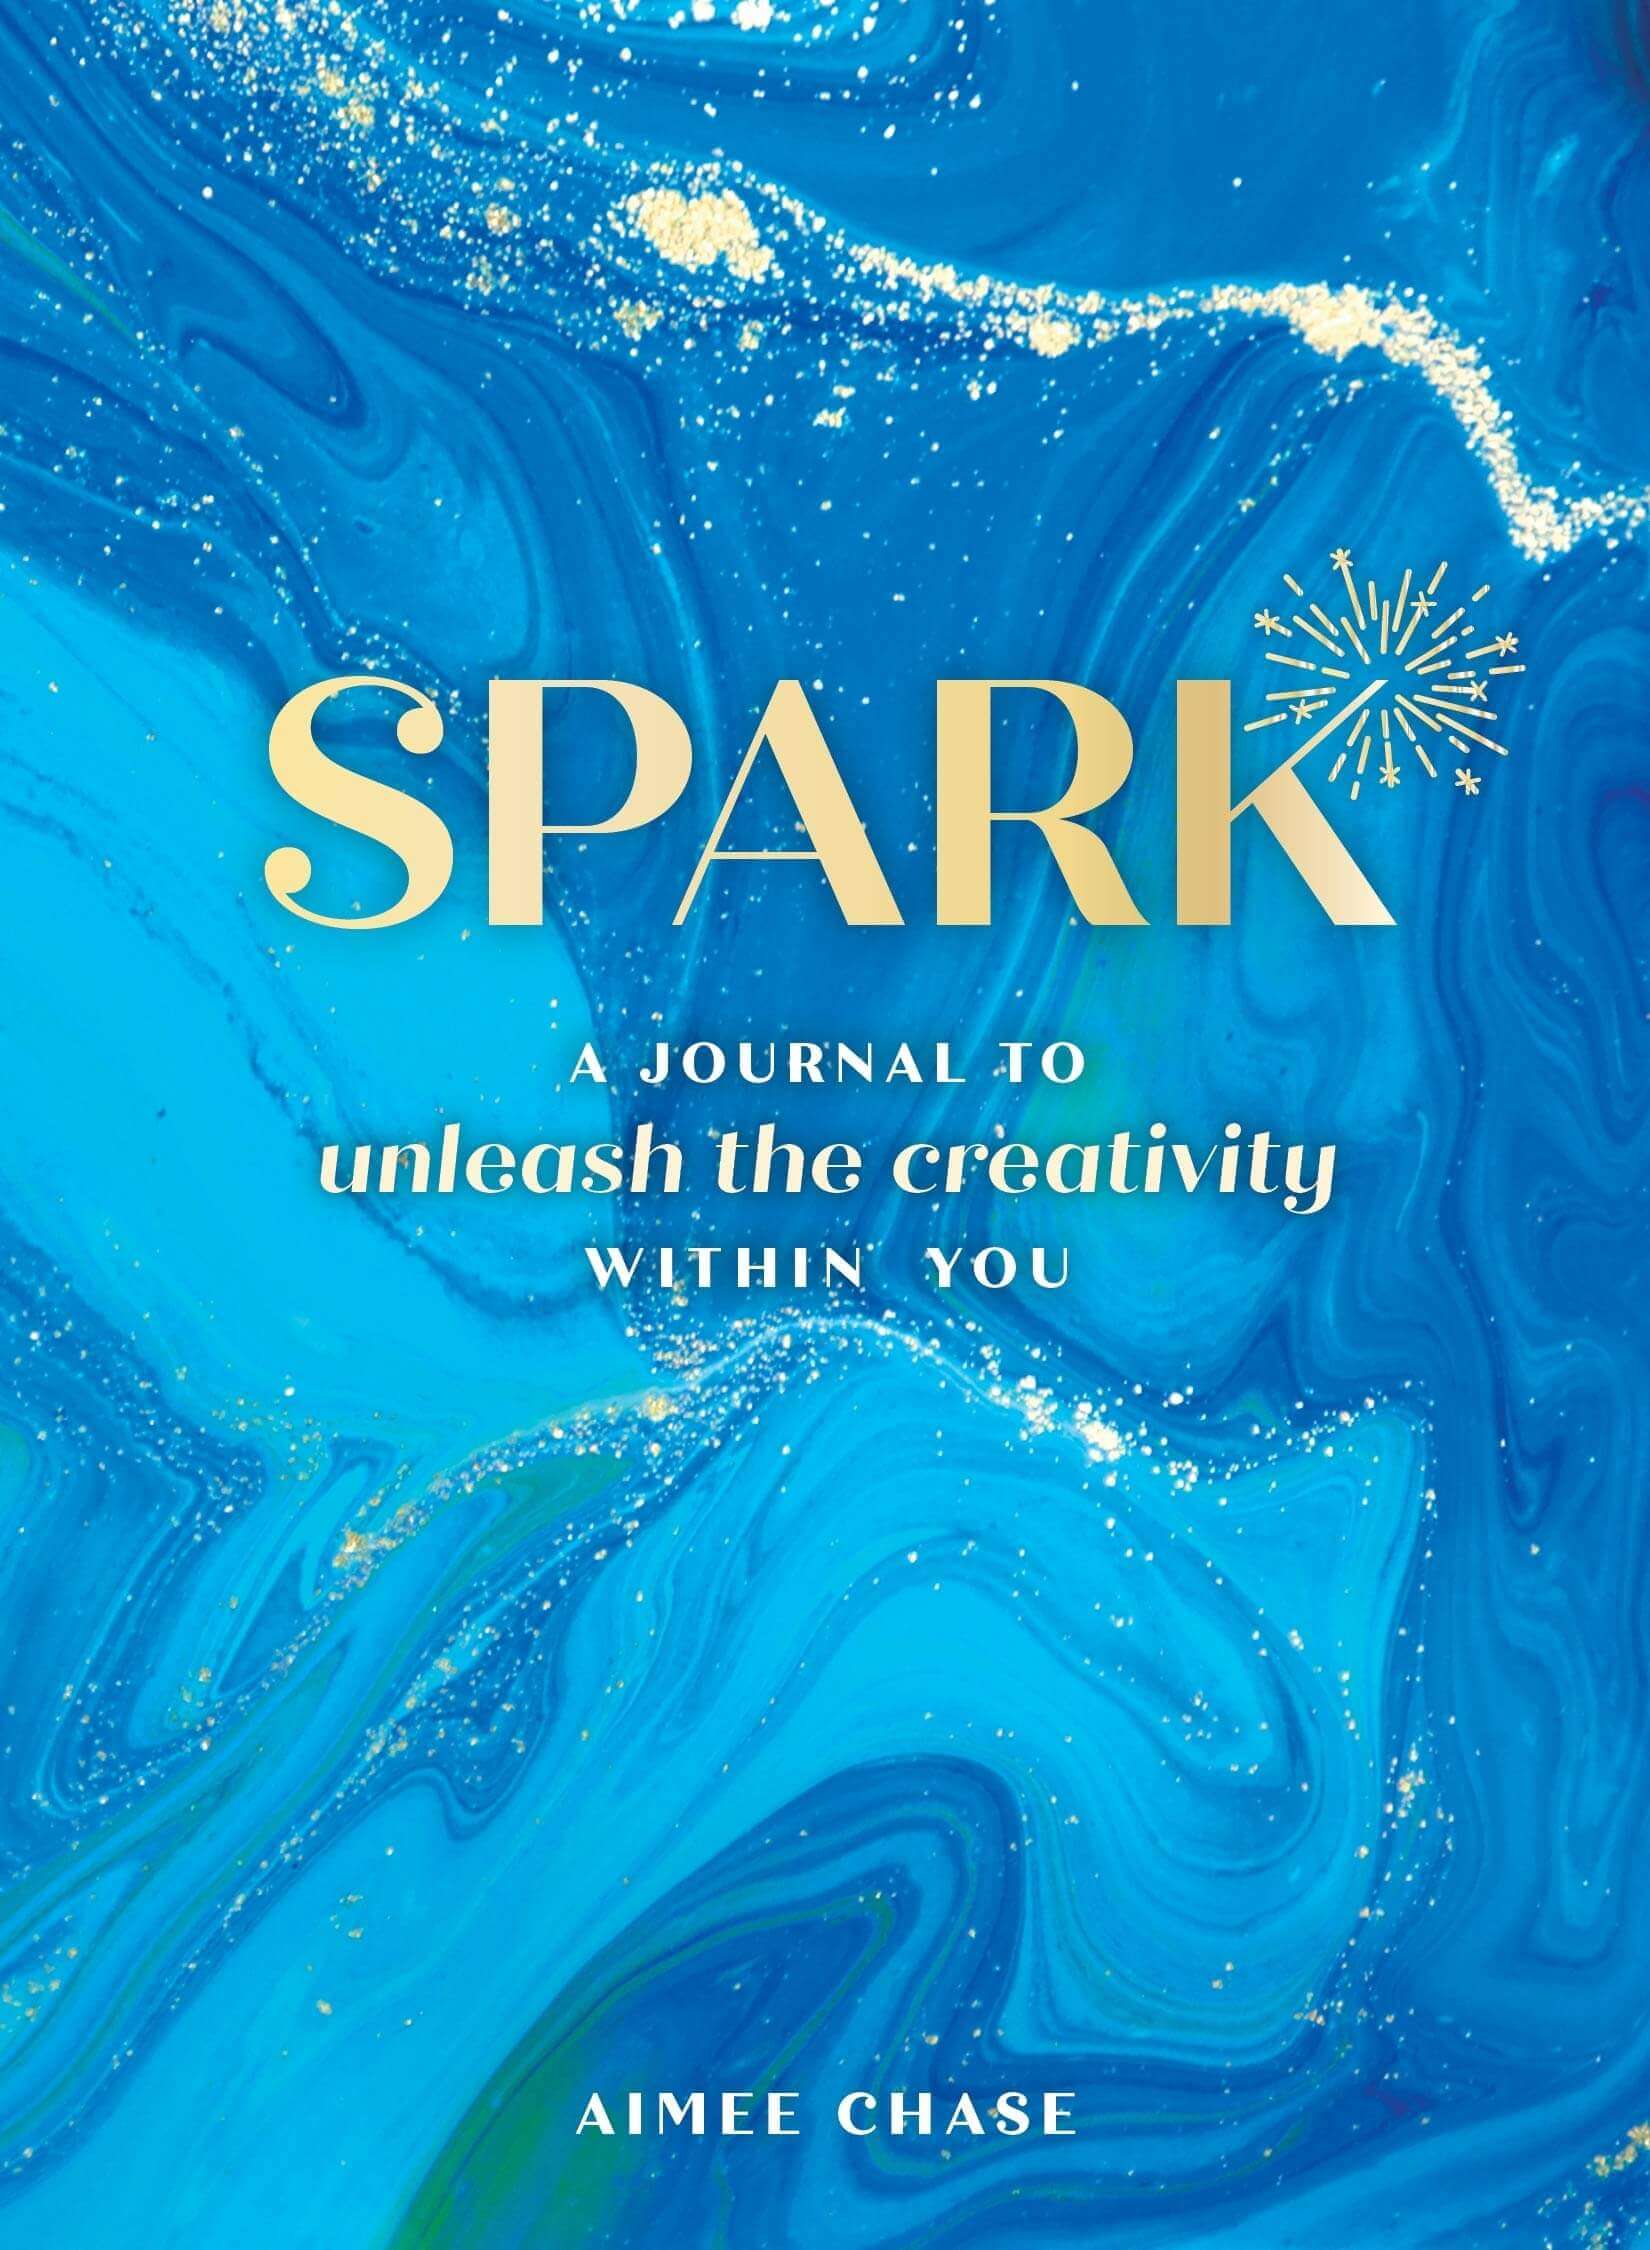 Spark: A Journal to Unleash the Creativity Within You at $15 only from Spiral Rain